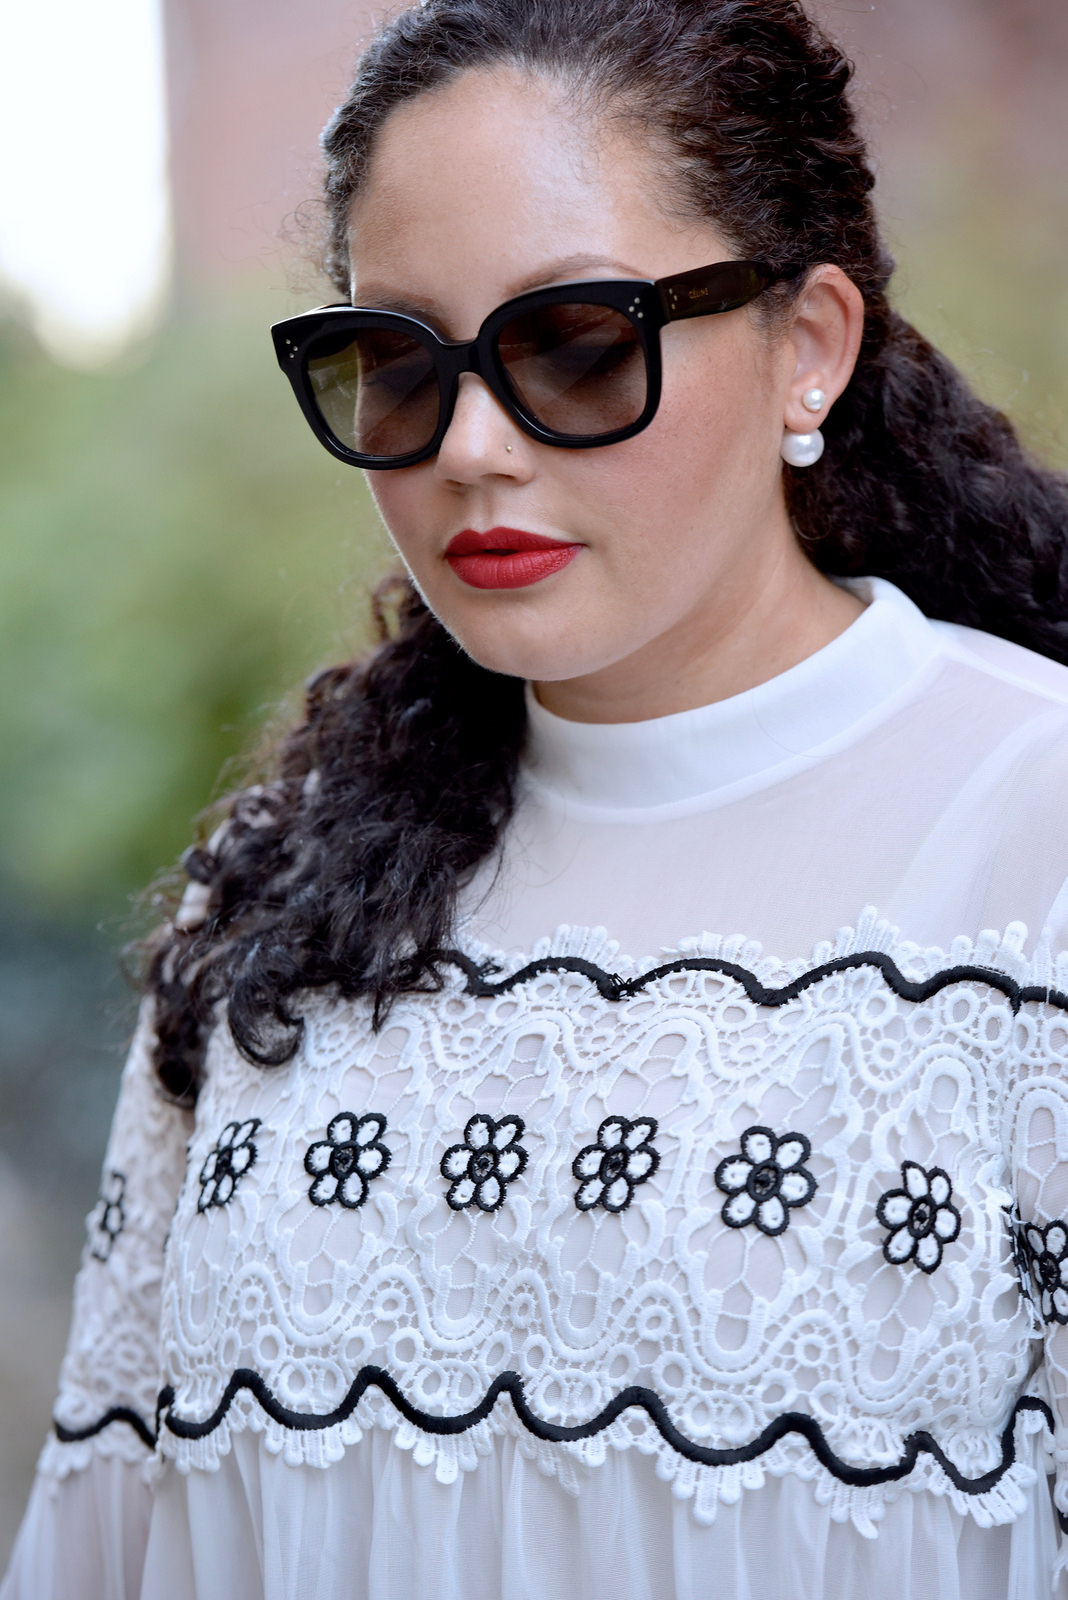 Girl With Curves featuring Celine sunglasses and Asos lace blouse, with Nars red lipstick.